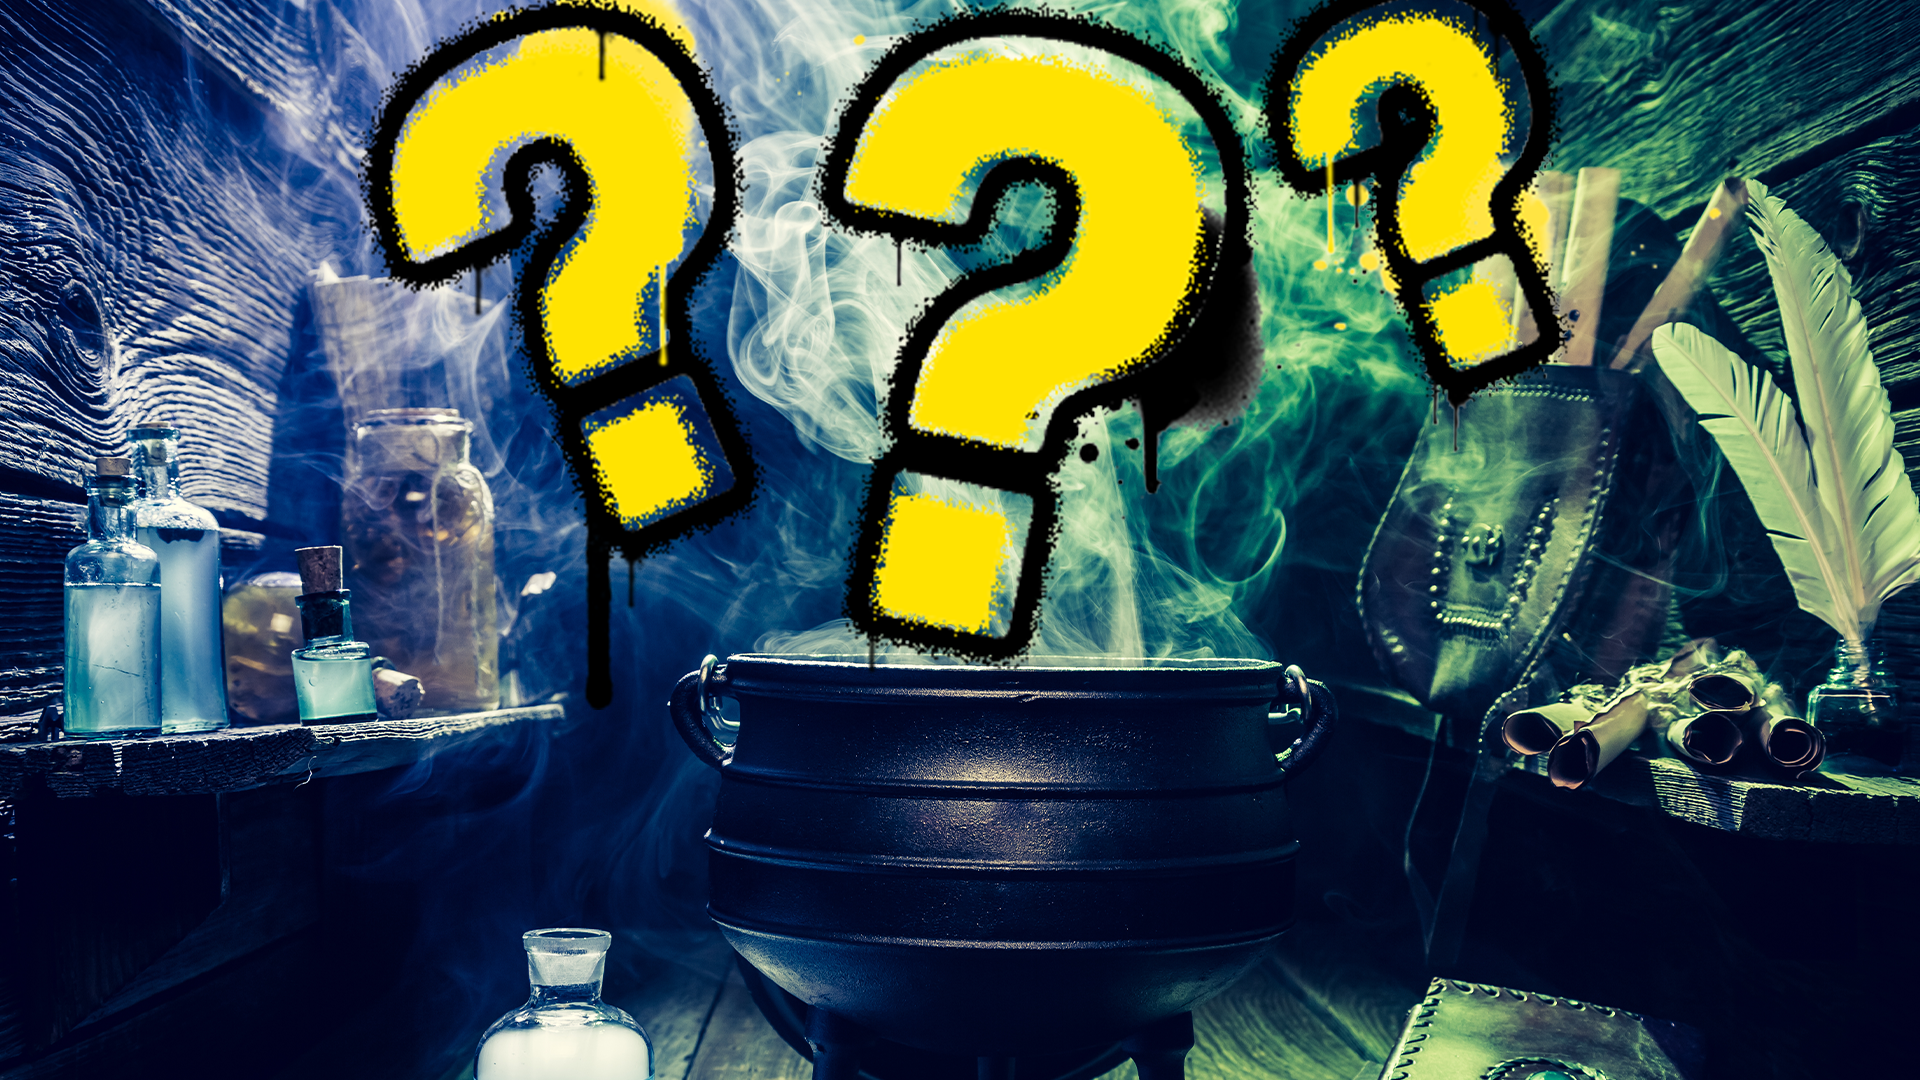 A room full of potions and a cauldron and a question mark